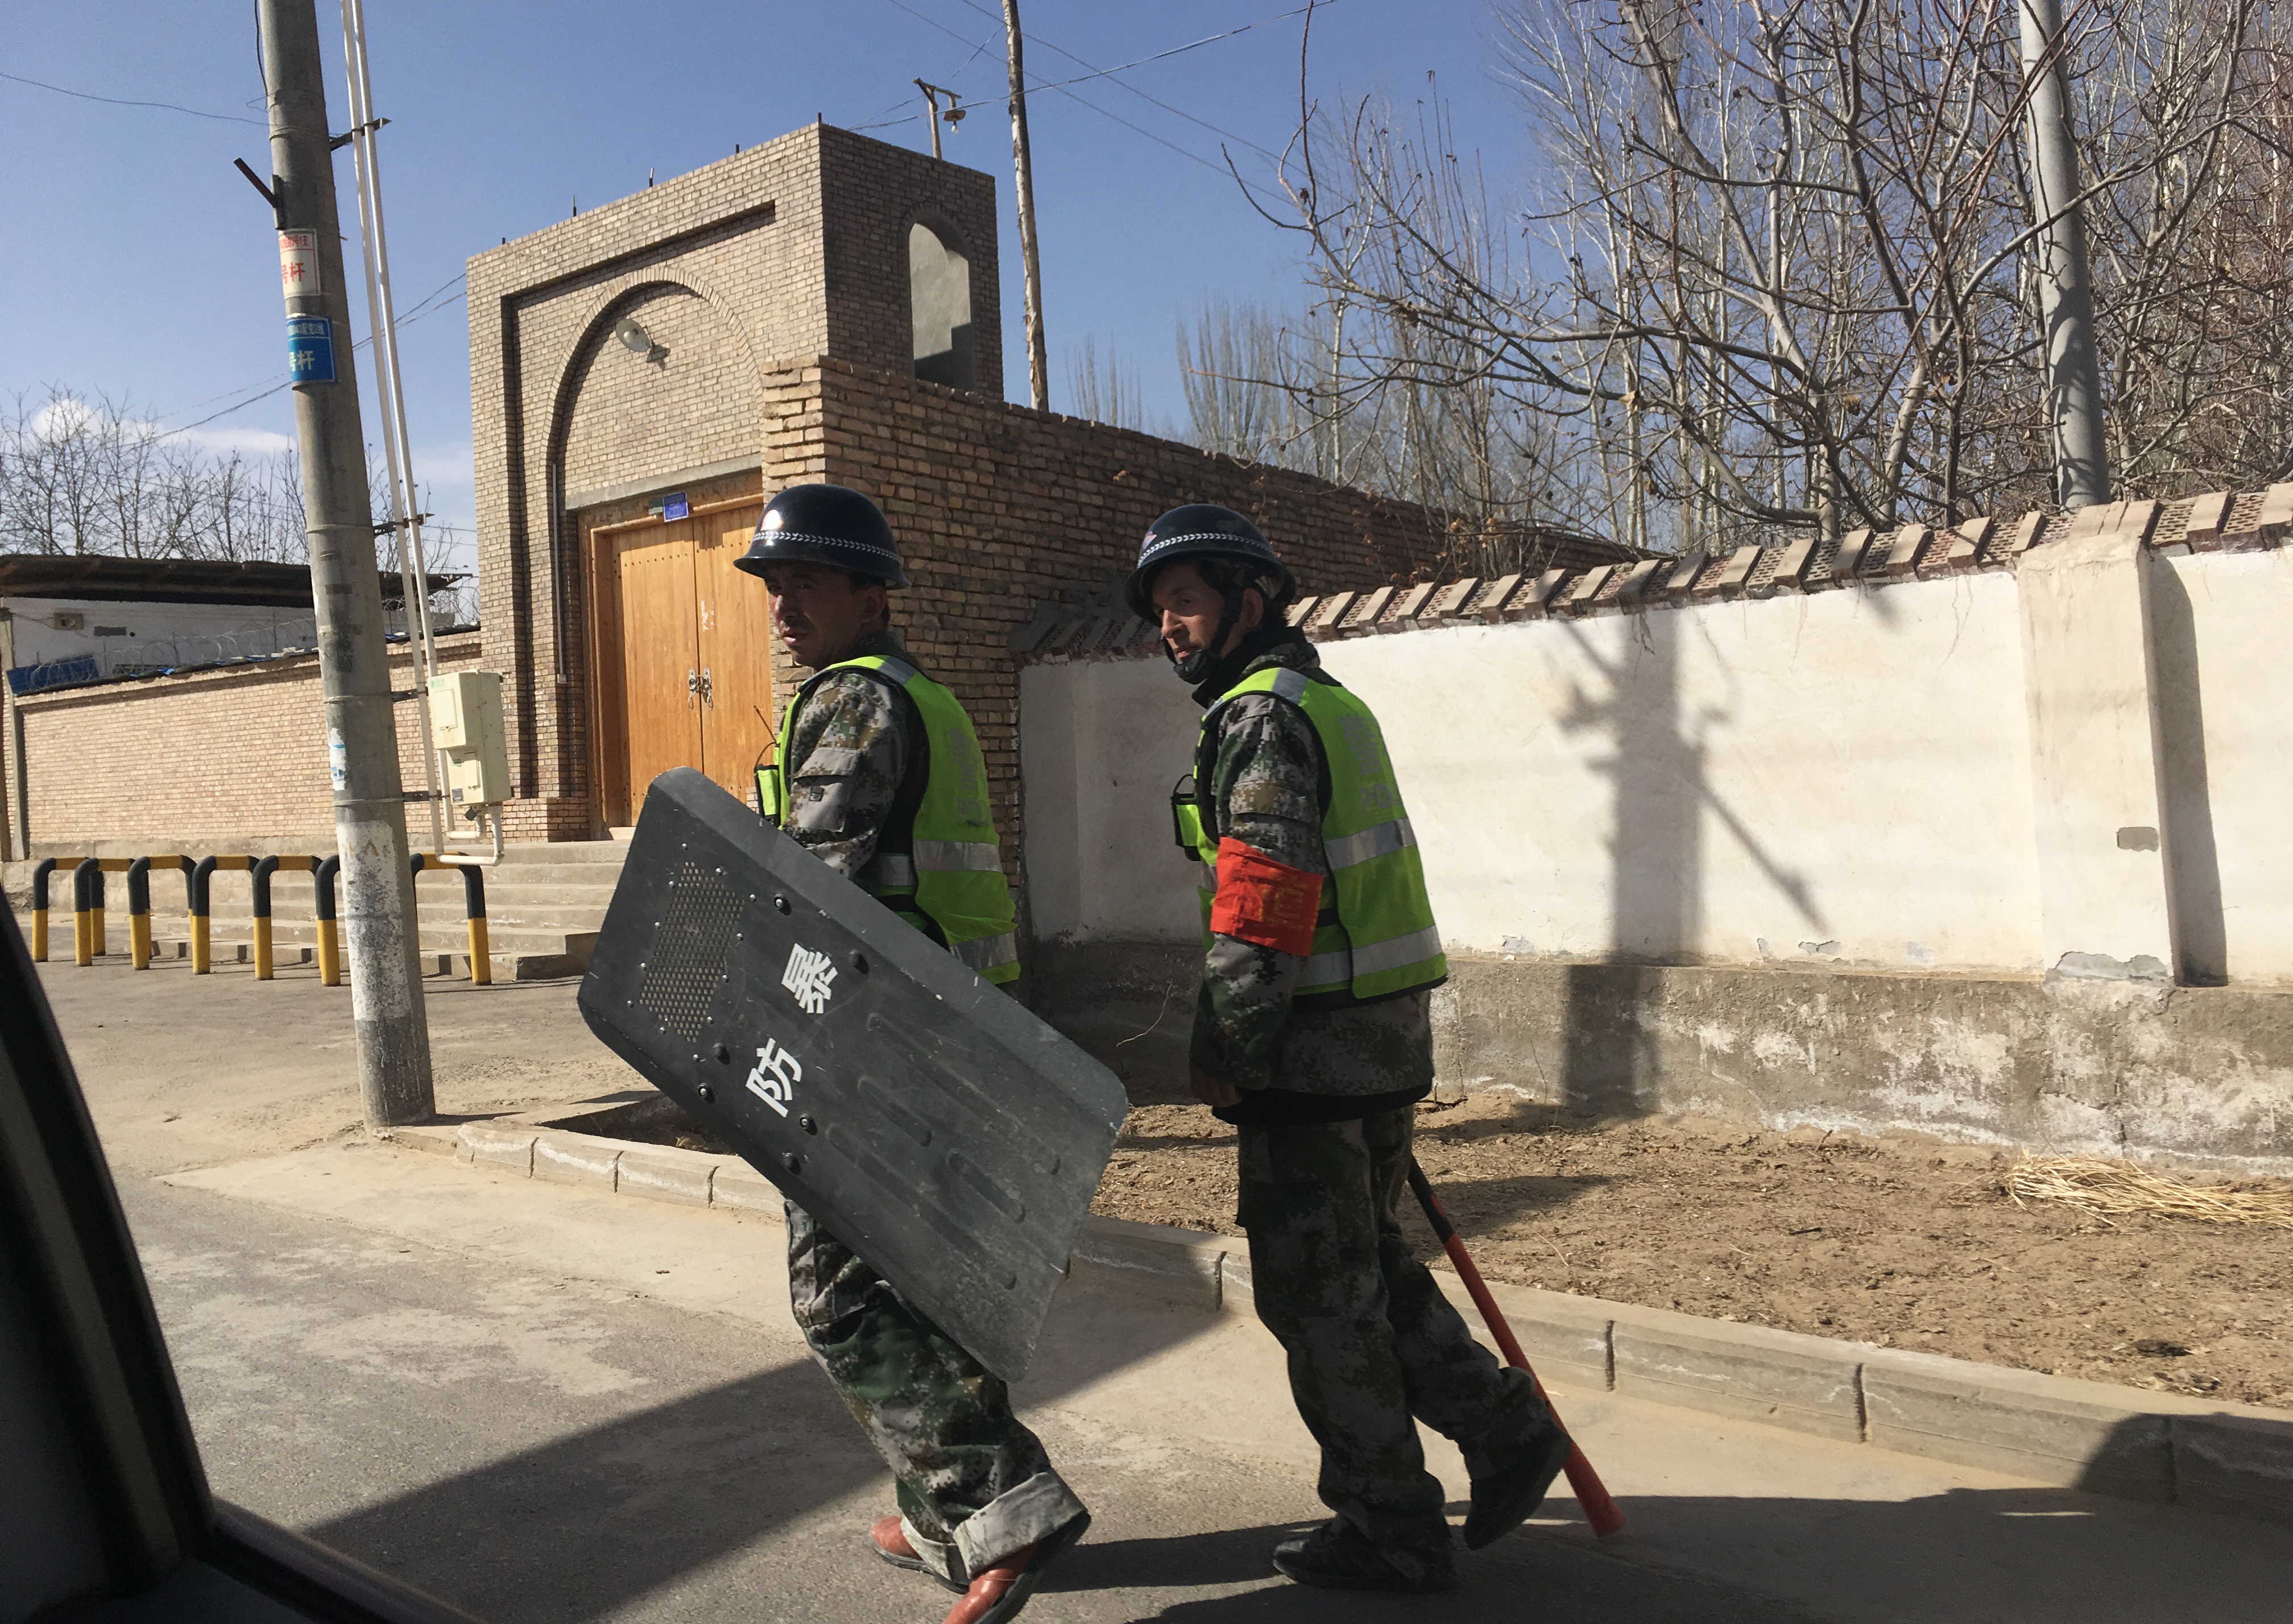 Police patrol a village in Hotan prefecture, in China's western Xinjiang region on Feb. 17, 2018. (Ben Dooley&mdash;AFP/Getty Images)